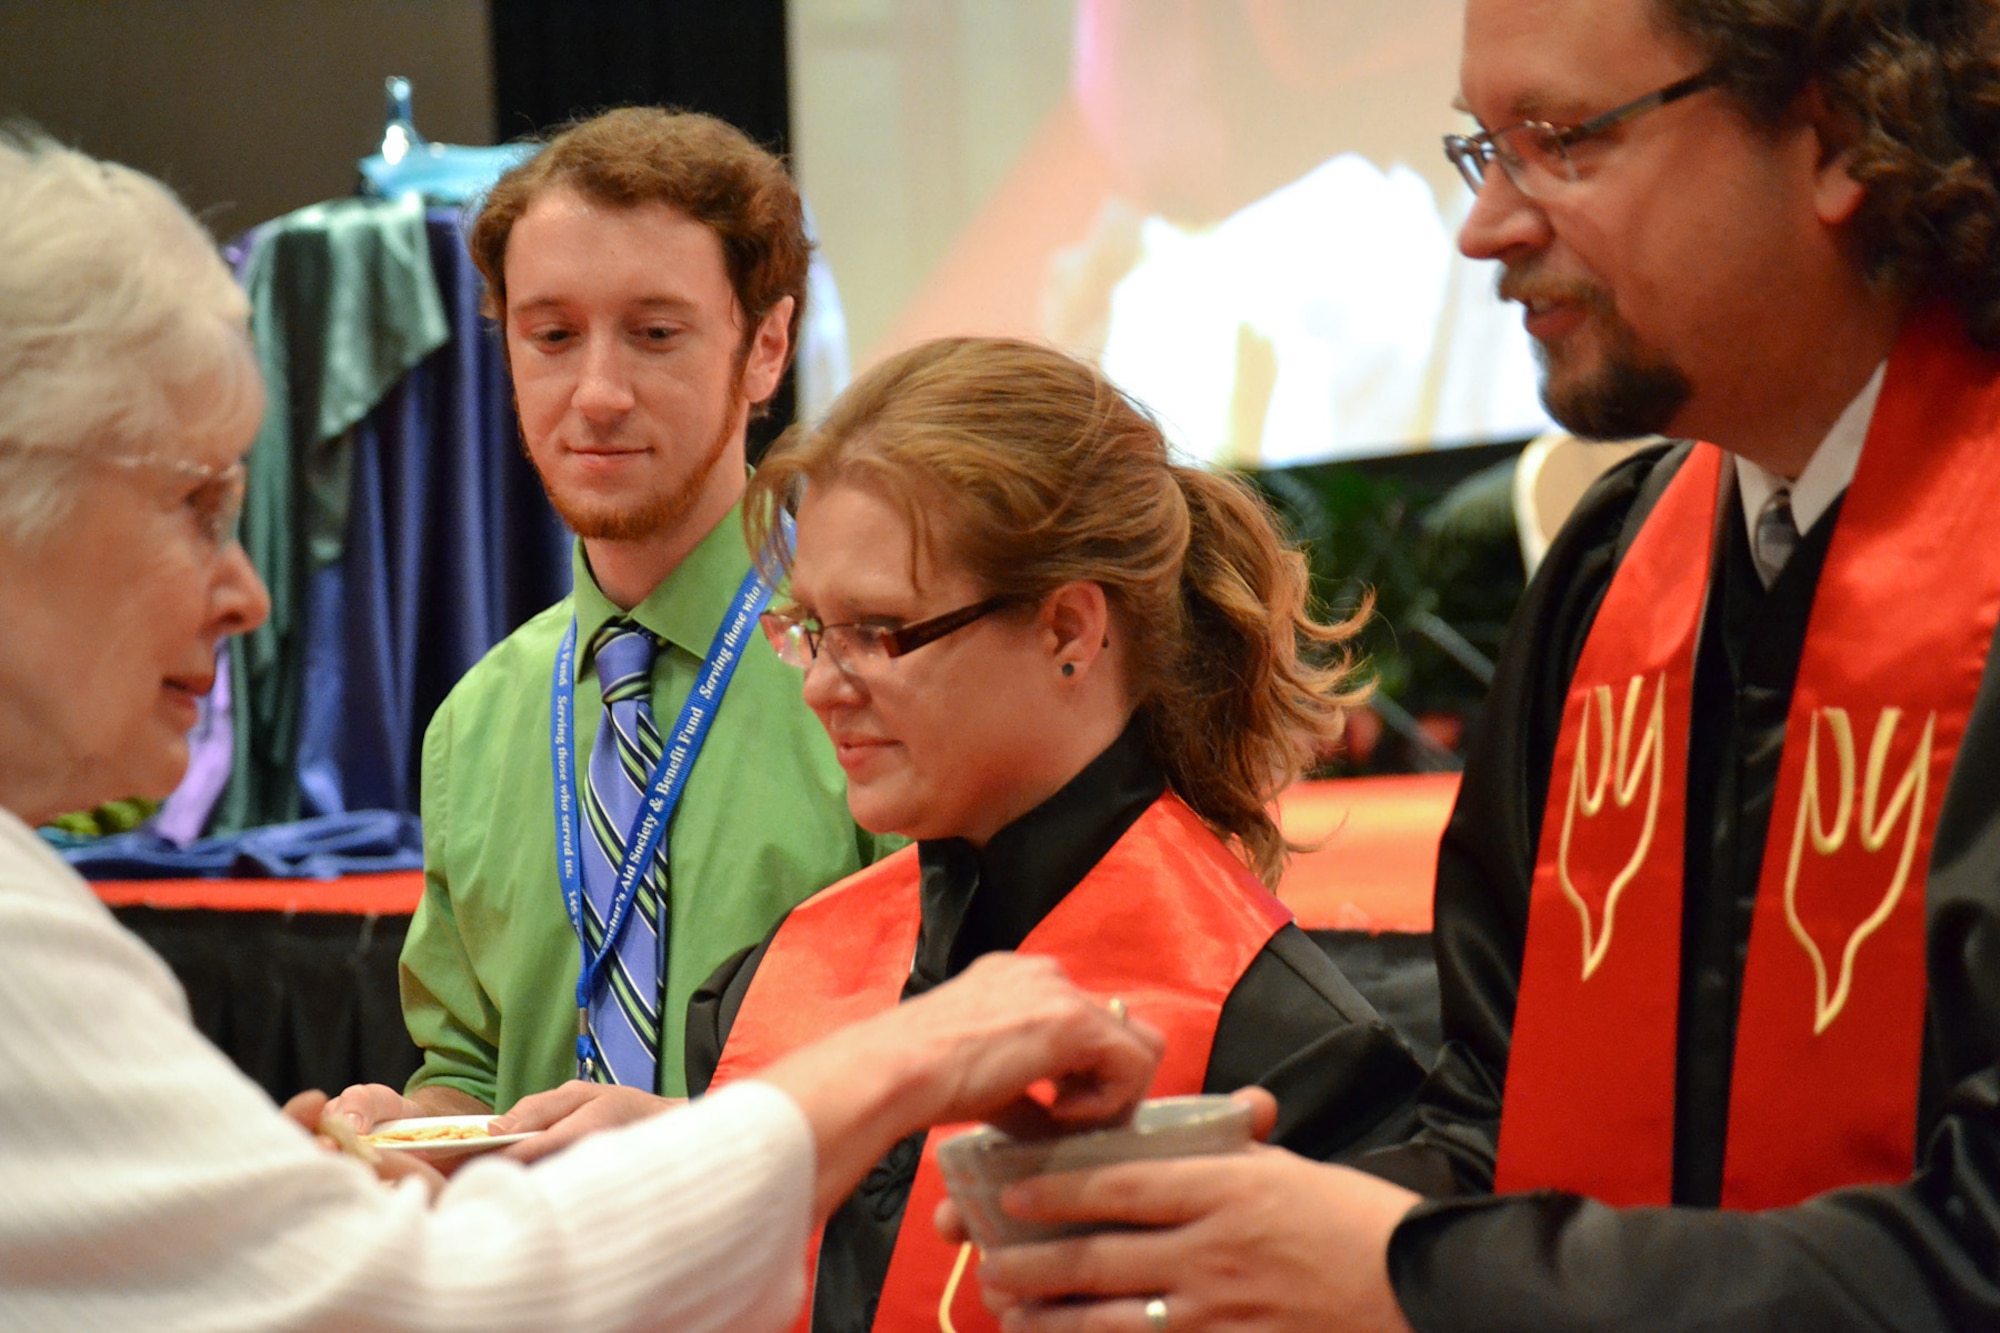 U.S. Air Force Chaplain (Capt.) Kristi L. Hopp, center, serves communion during her ordination ceremony in Peoria, Ill., June 6, 2014. The United Methodist Church ordained Hopp after completing an 8-year process of education and evaluation. She first became interested in the military during a Veterans Affairs hospital internship. “The stressors that we all are under in the Guard and being deployed are different. And yeah, sometimes we come back wounded, but then that’s kind of what war does,” she said. “It might not always wound us on the outside, but it can wound us on the inside. And so, it’s a very rewarding ministry to be able to serve here.” (Photo courtesy from Chaplain (Capt.) Kristi L. Hopp/Released)